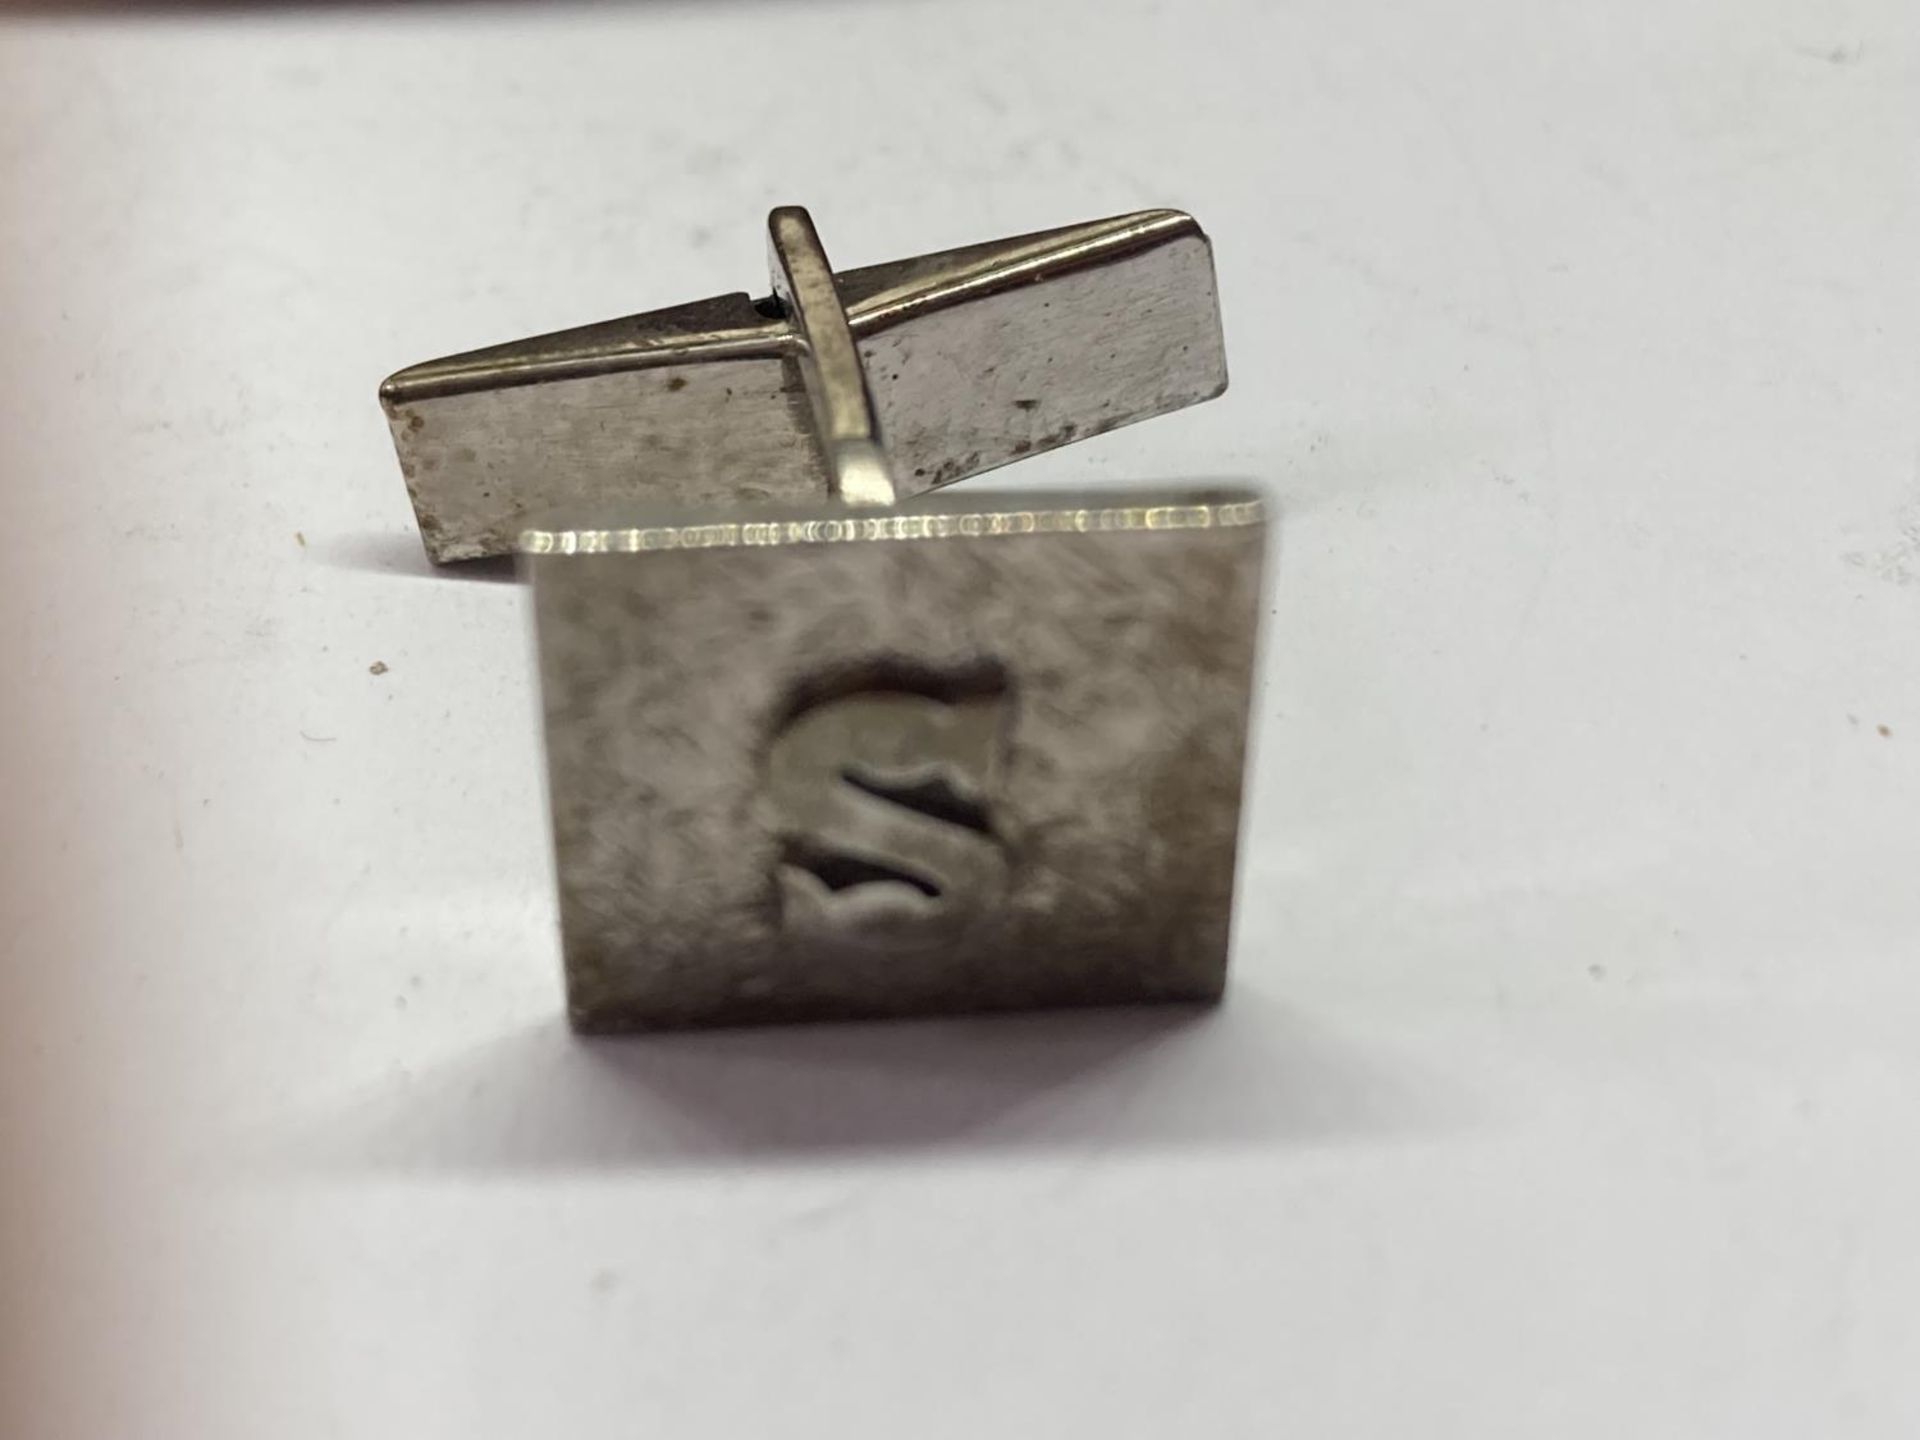 A PAIR OF SILVER CUFFLINKS IN A PRESENTATION BOX - Image 3 of 3